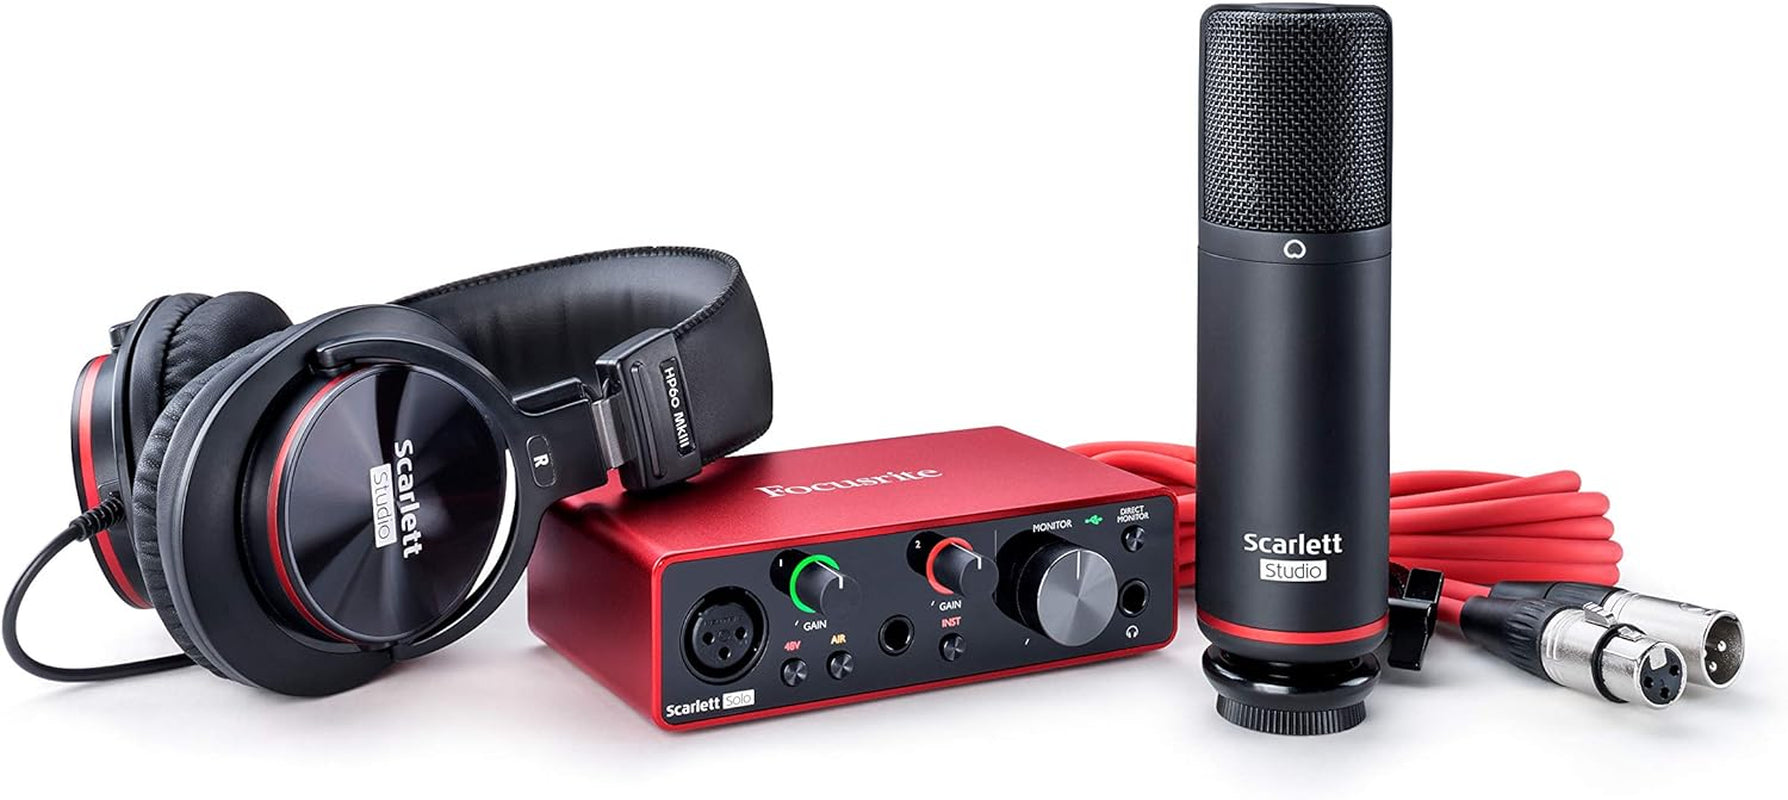 Scarlett Solo Studio 3Rd Gen USB Audio Interface Bundle for the Guitarist, Vocalist or Producer with Condenser Microphone and Headphones for Recording, Songwriting, Streaming and Podcasting